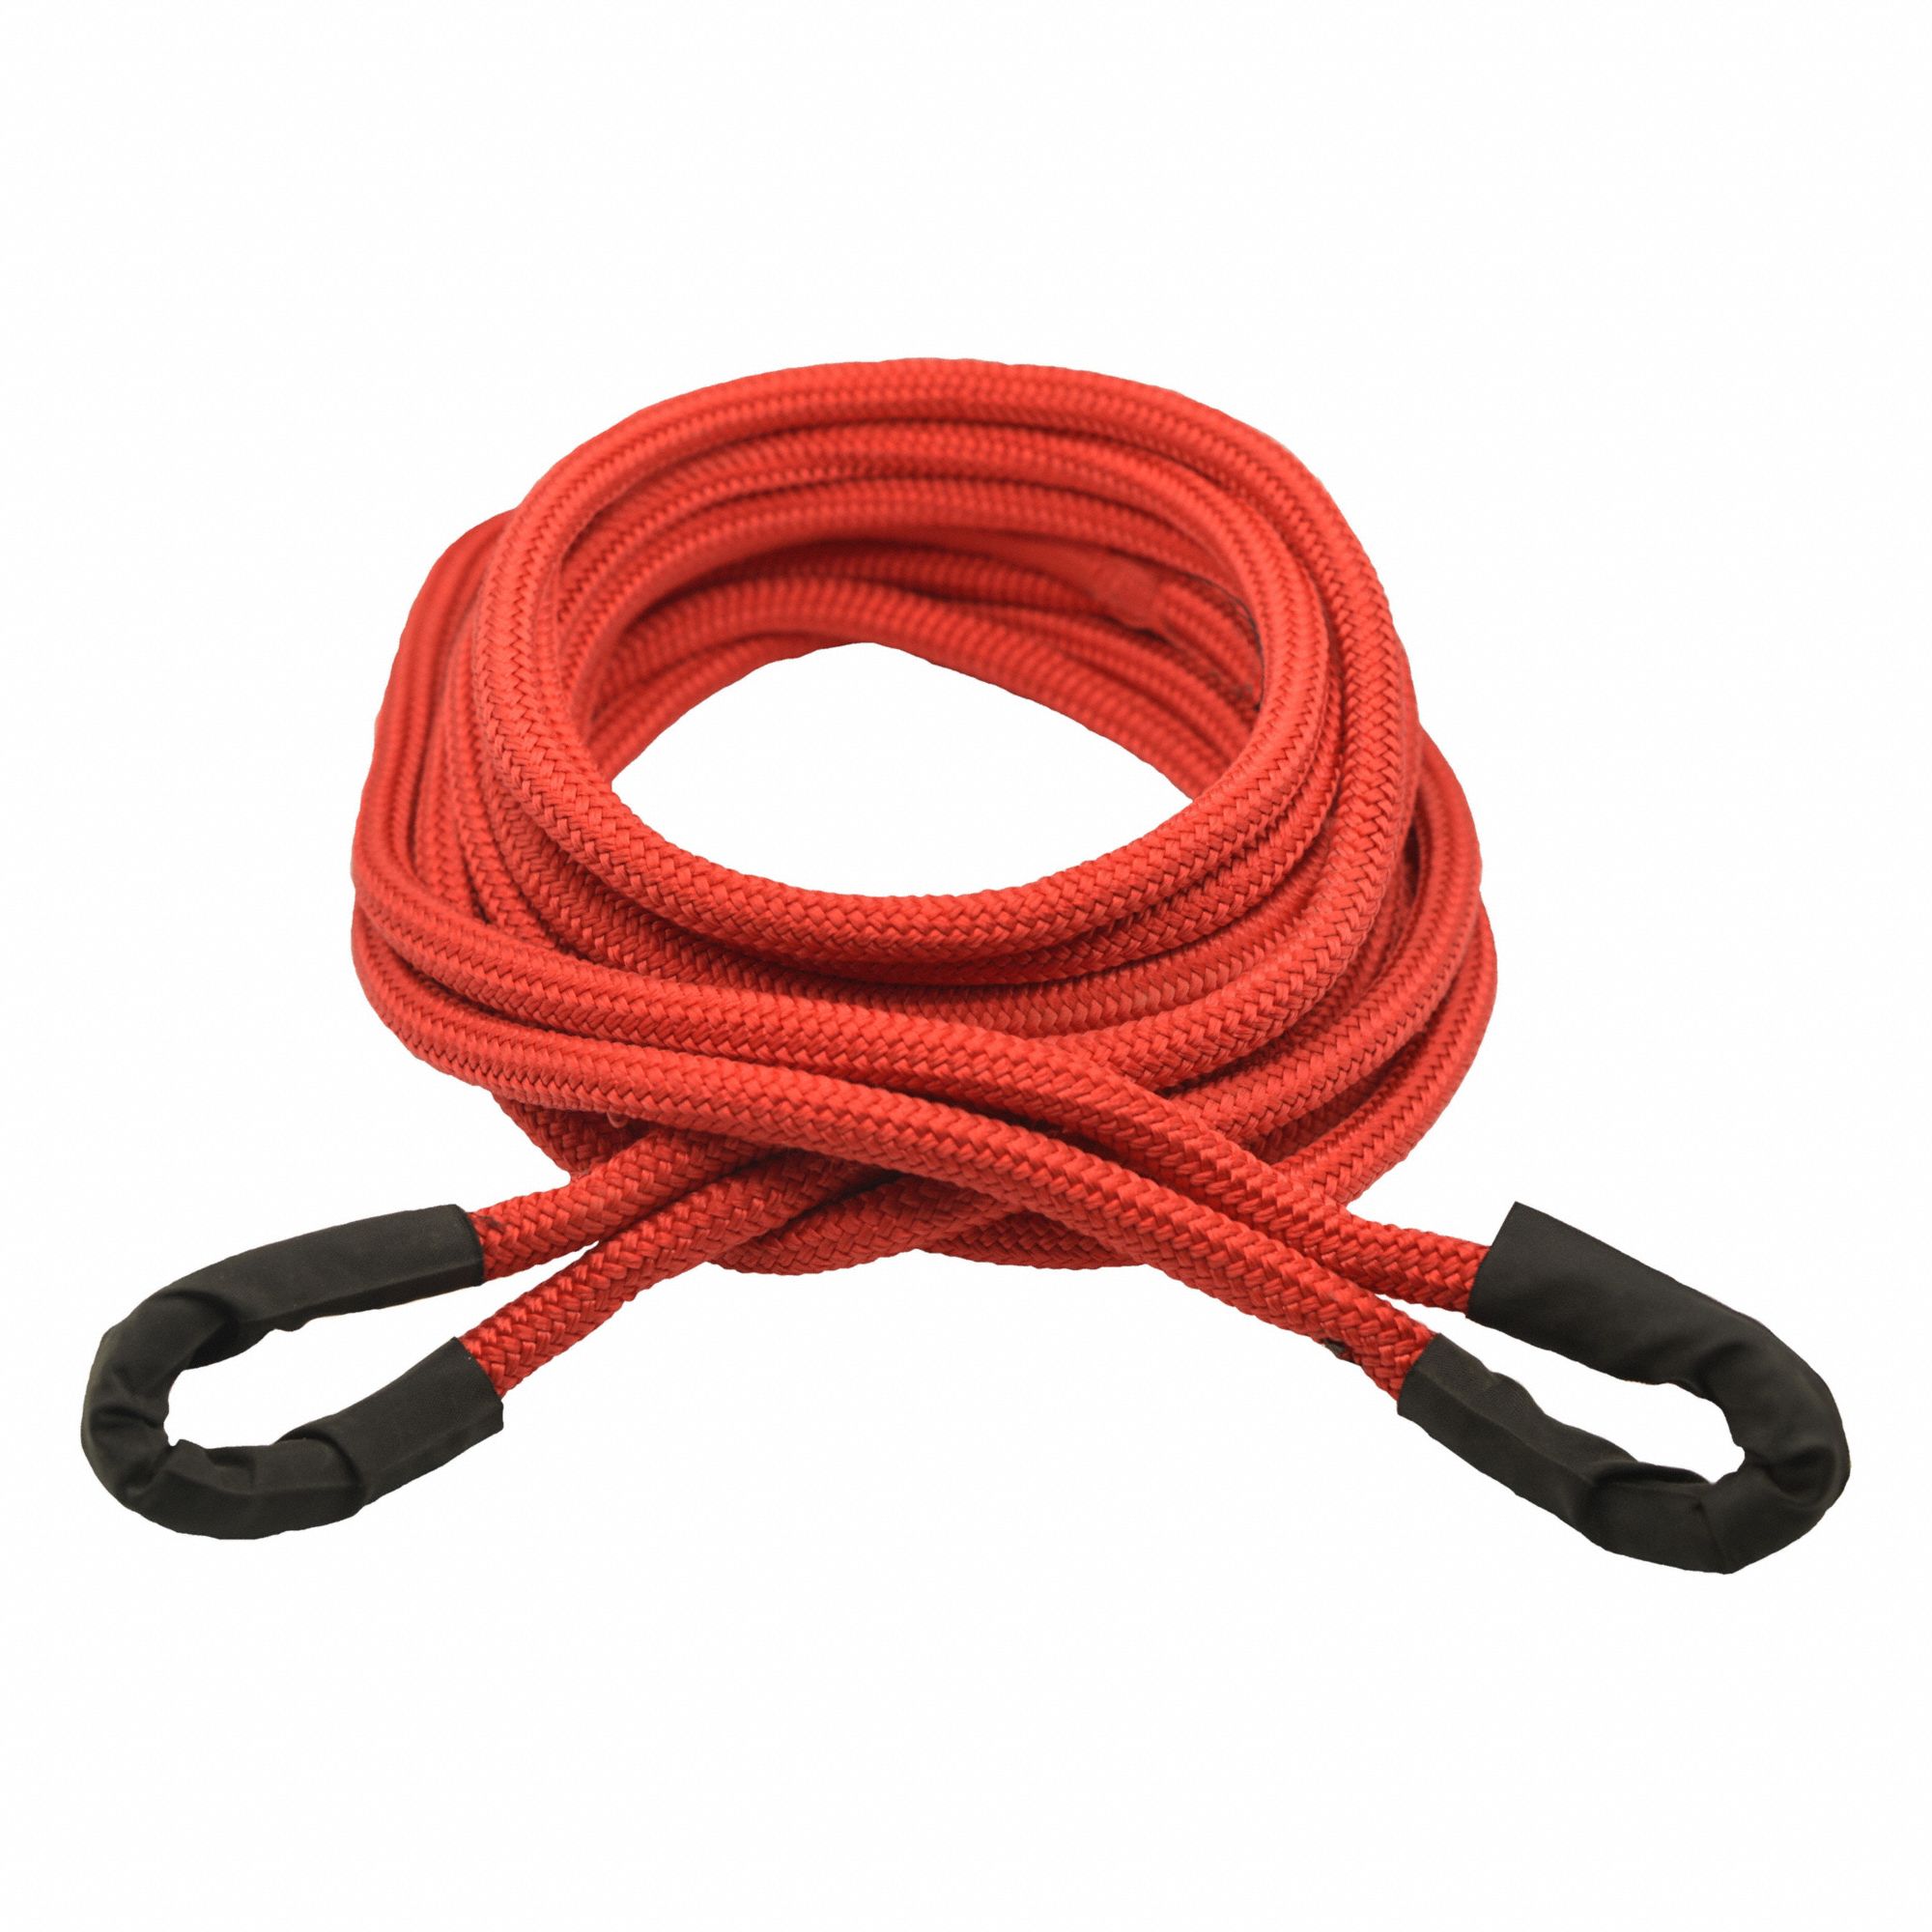 Recovery Rope: 20 ft Lg, 1/2 in Dia, Nylon, Loop, Nylon, Red, Includes Storage Bag